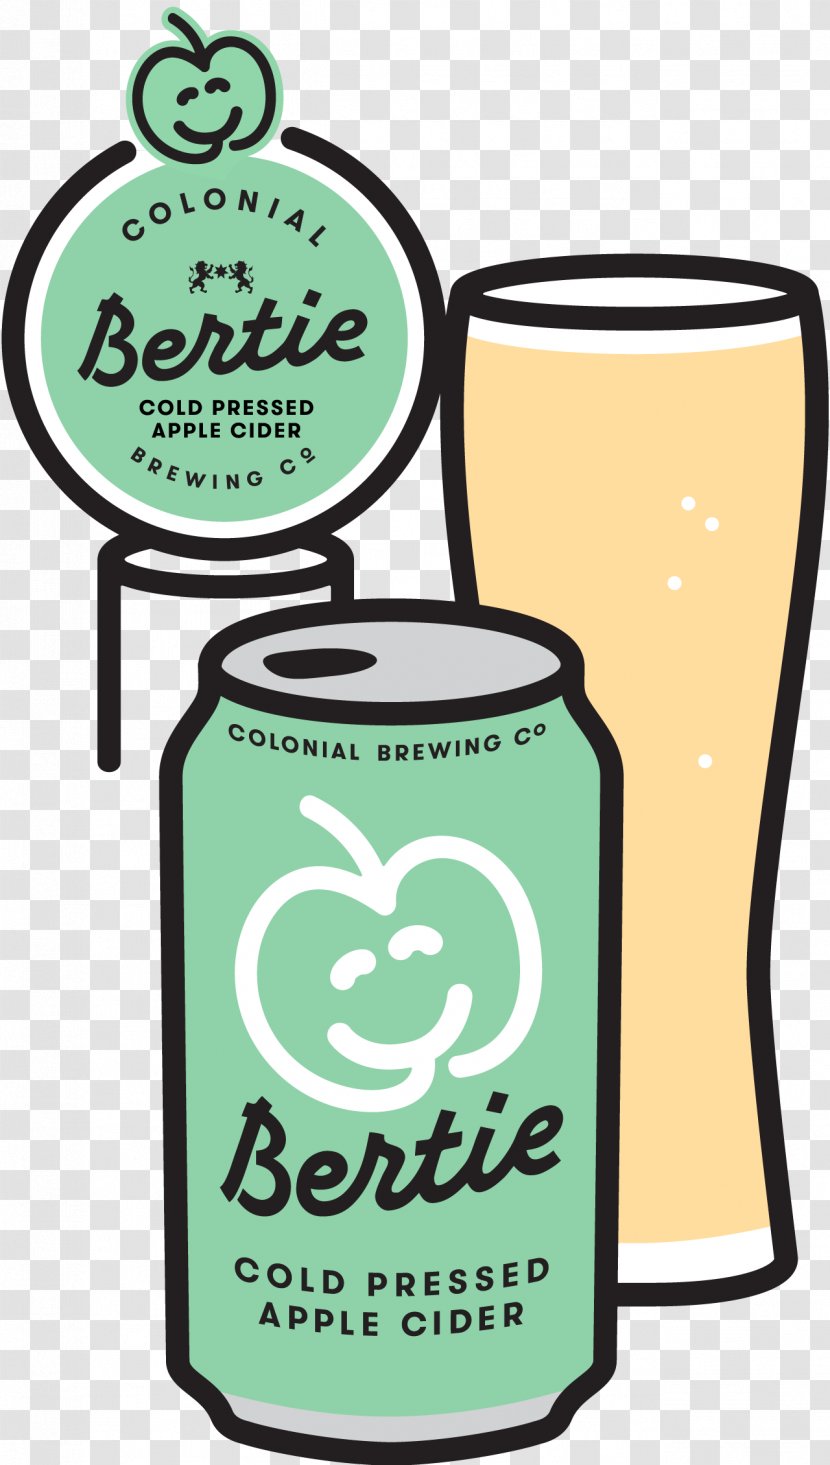 Colonial Brewing Co Cider Margaret River Pint Glass Bertie Street - Australia - Bestie Icon Transparent PNG